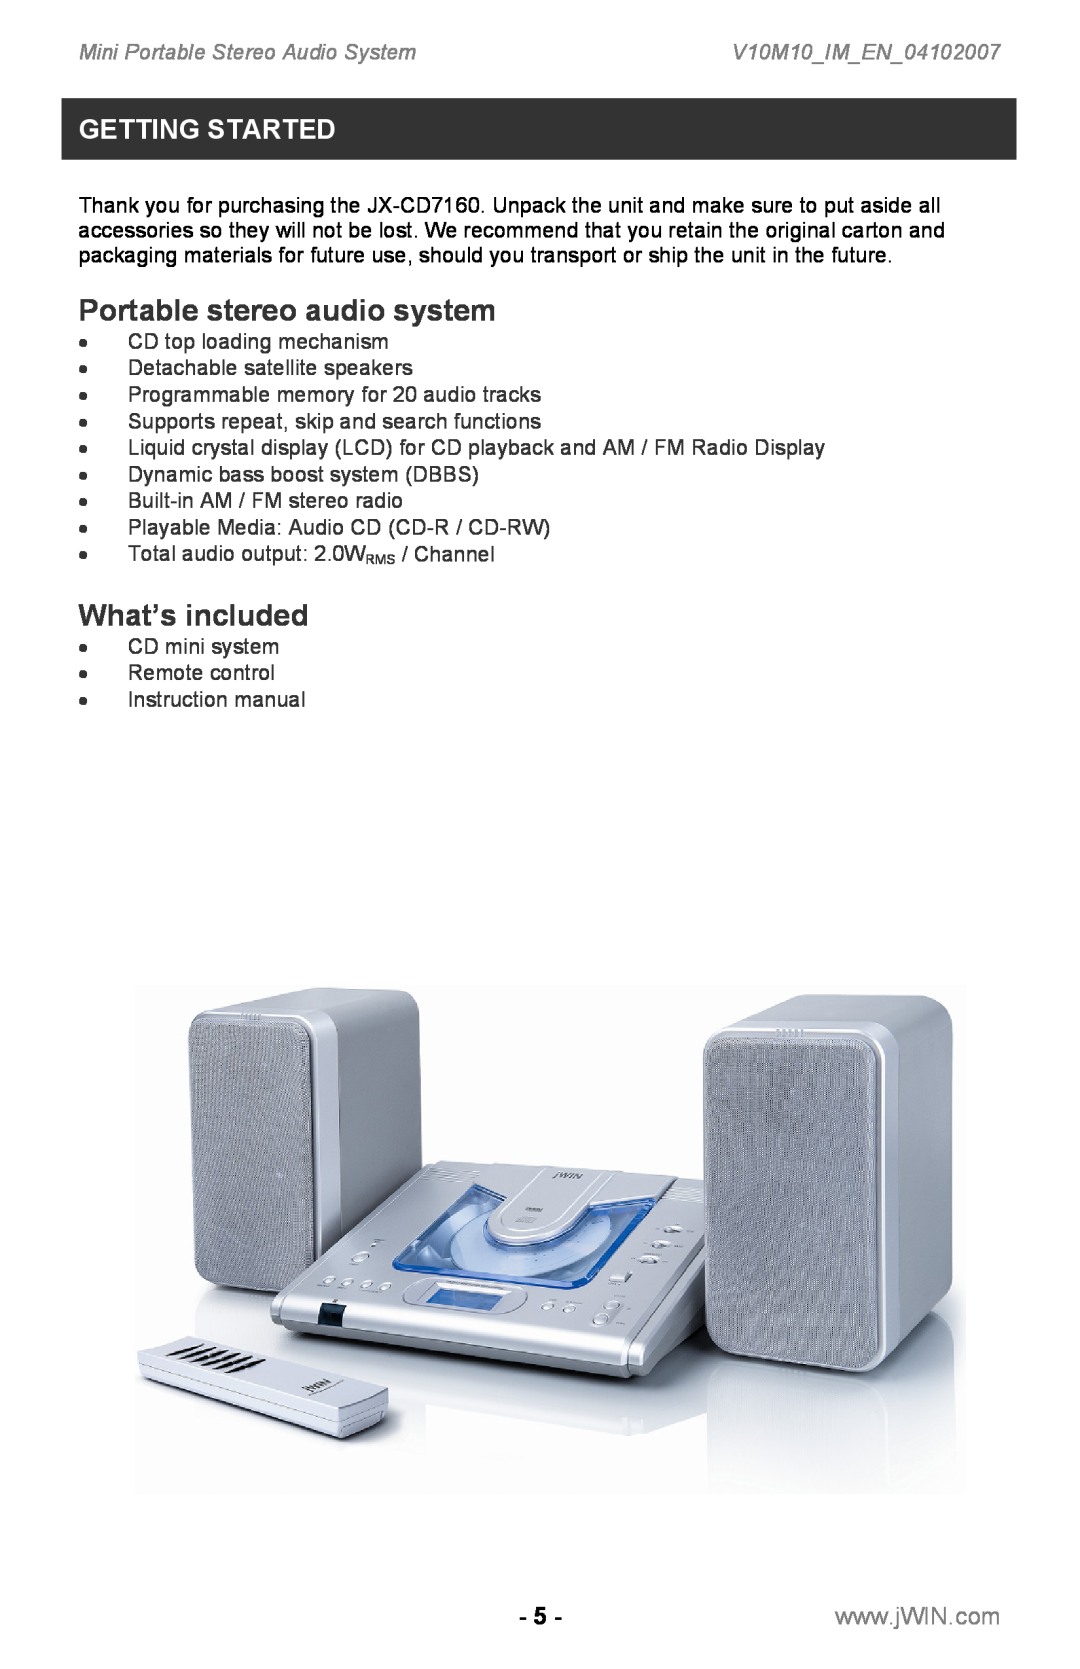 Jwin JX-CD7160 Getting Started, Portable stereo audio system, What’s included, Mini Portable Stereo Audio System 